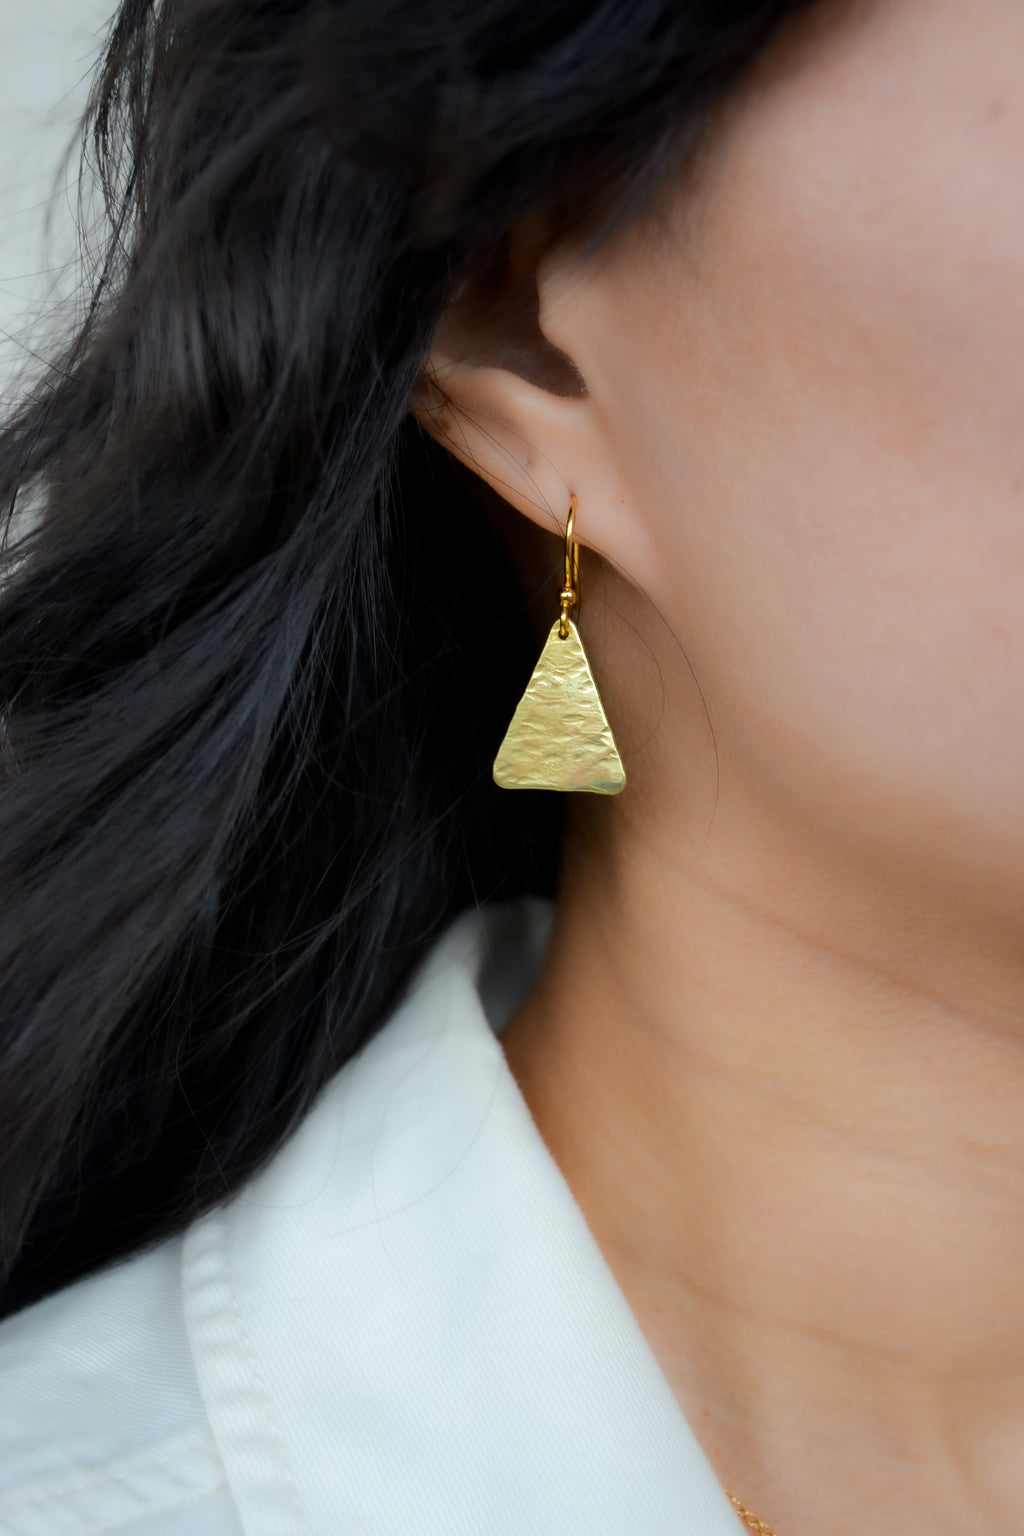 Equilateral Triangle Earrings